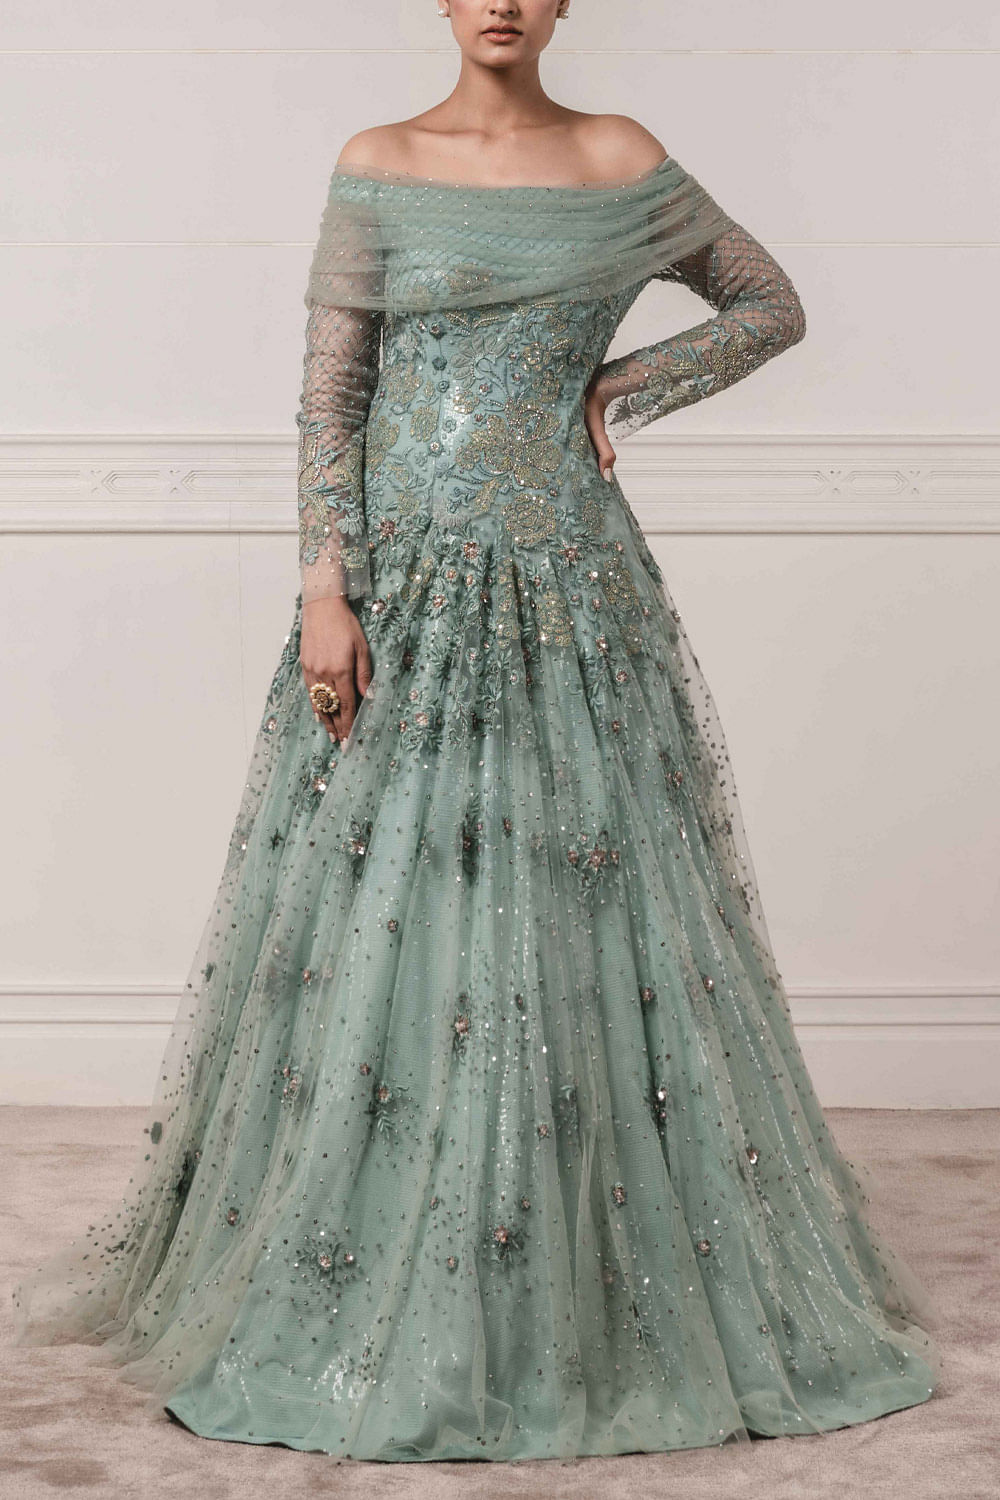 Tarun Tahiliani's Painterly Dreams Is a New Way Forward in Bridal Couture |  Femina.in